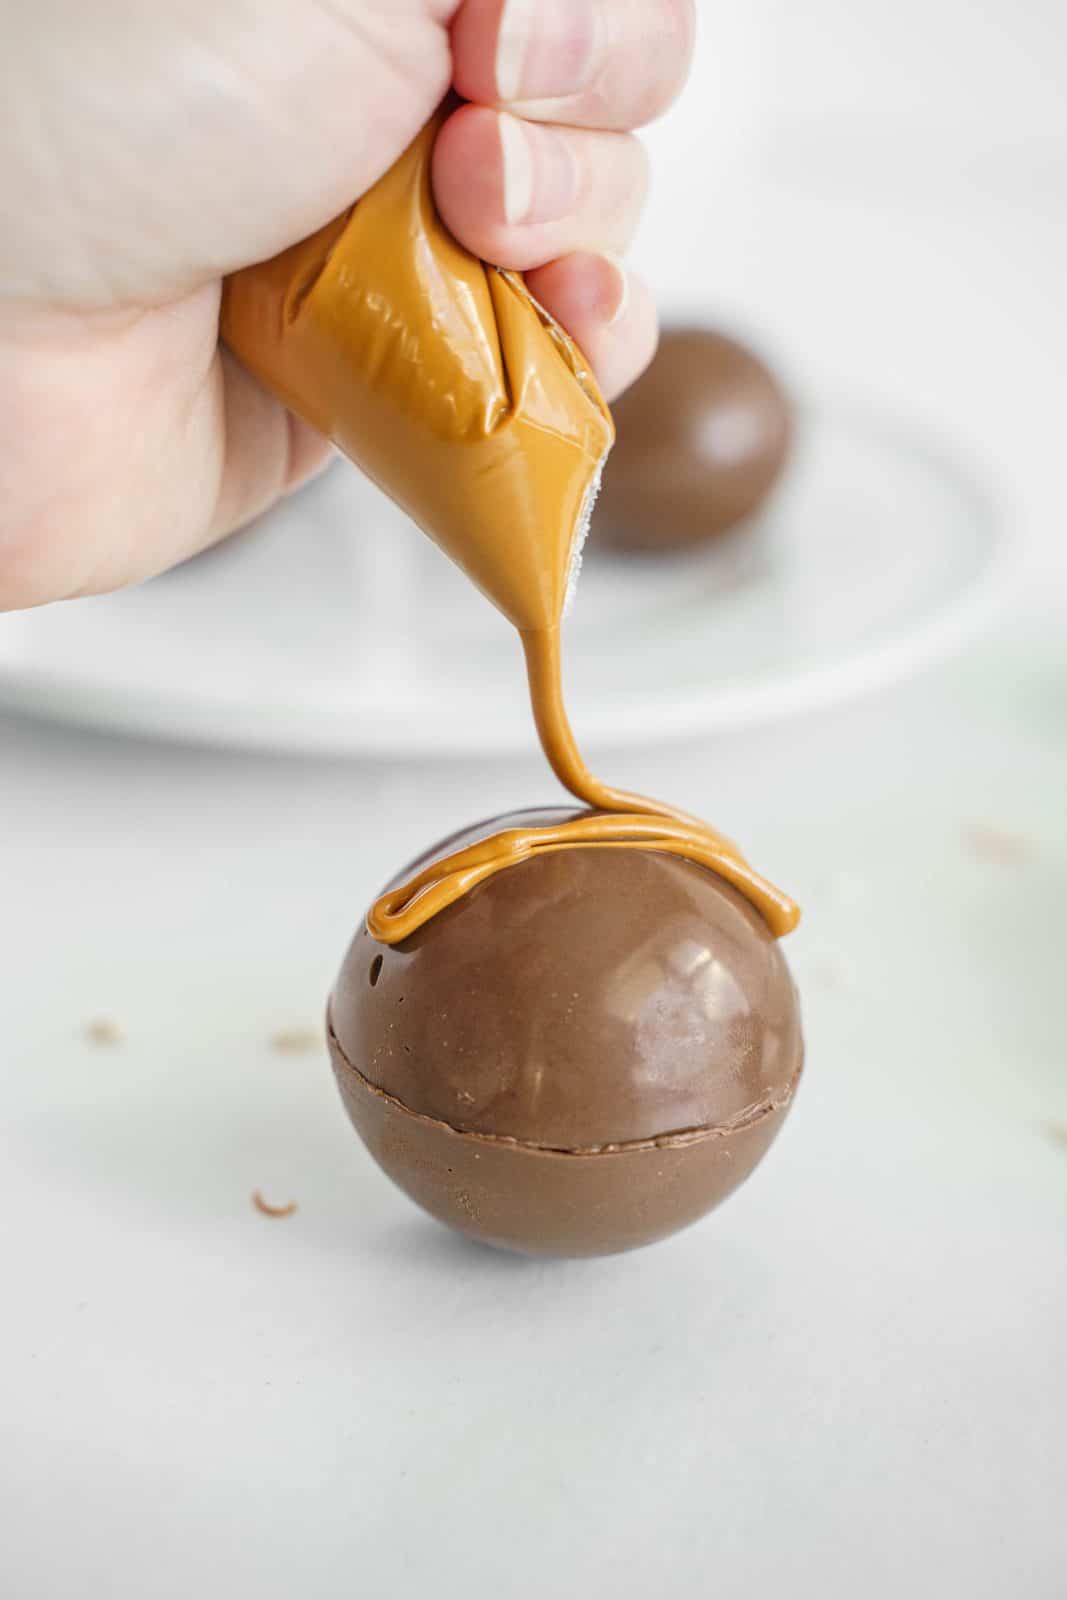 Peanut butter candy melts being piped over Hot Cocoa Bomb